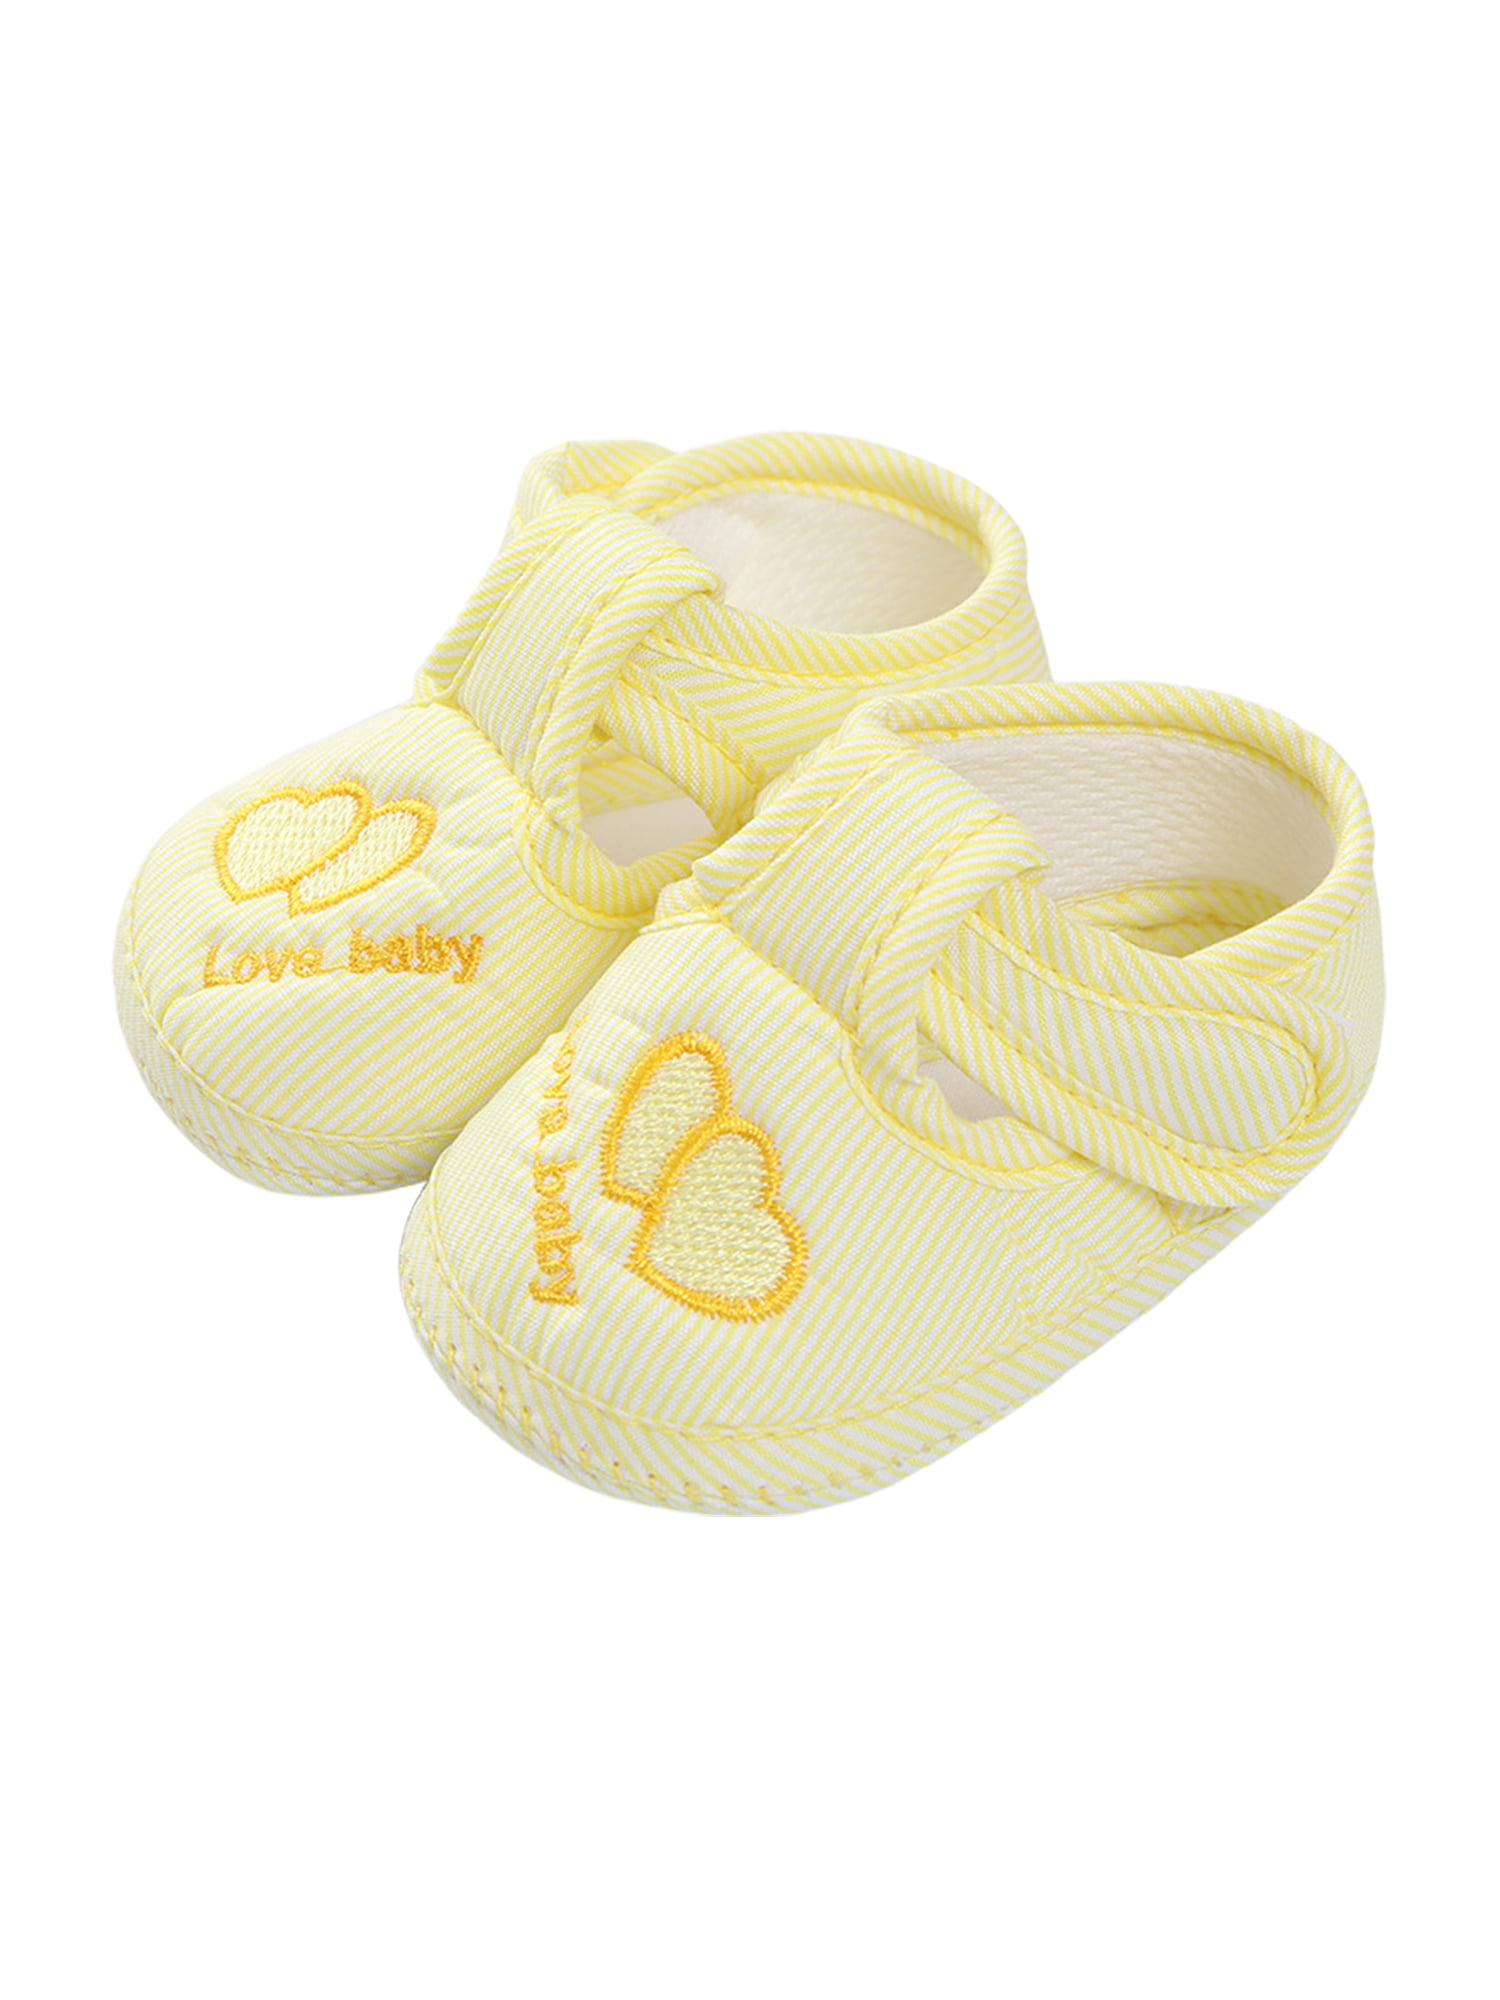 Girls Yellow Shoes - Buy Girls Yellow Shoes online in India